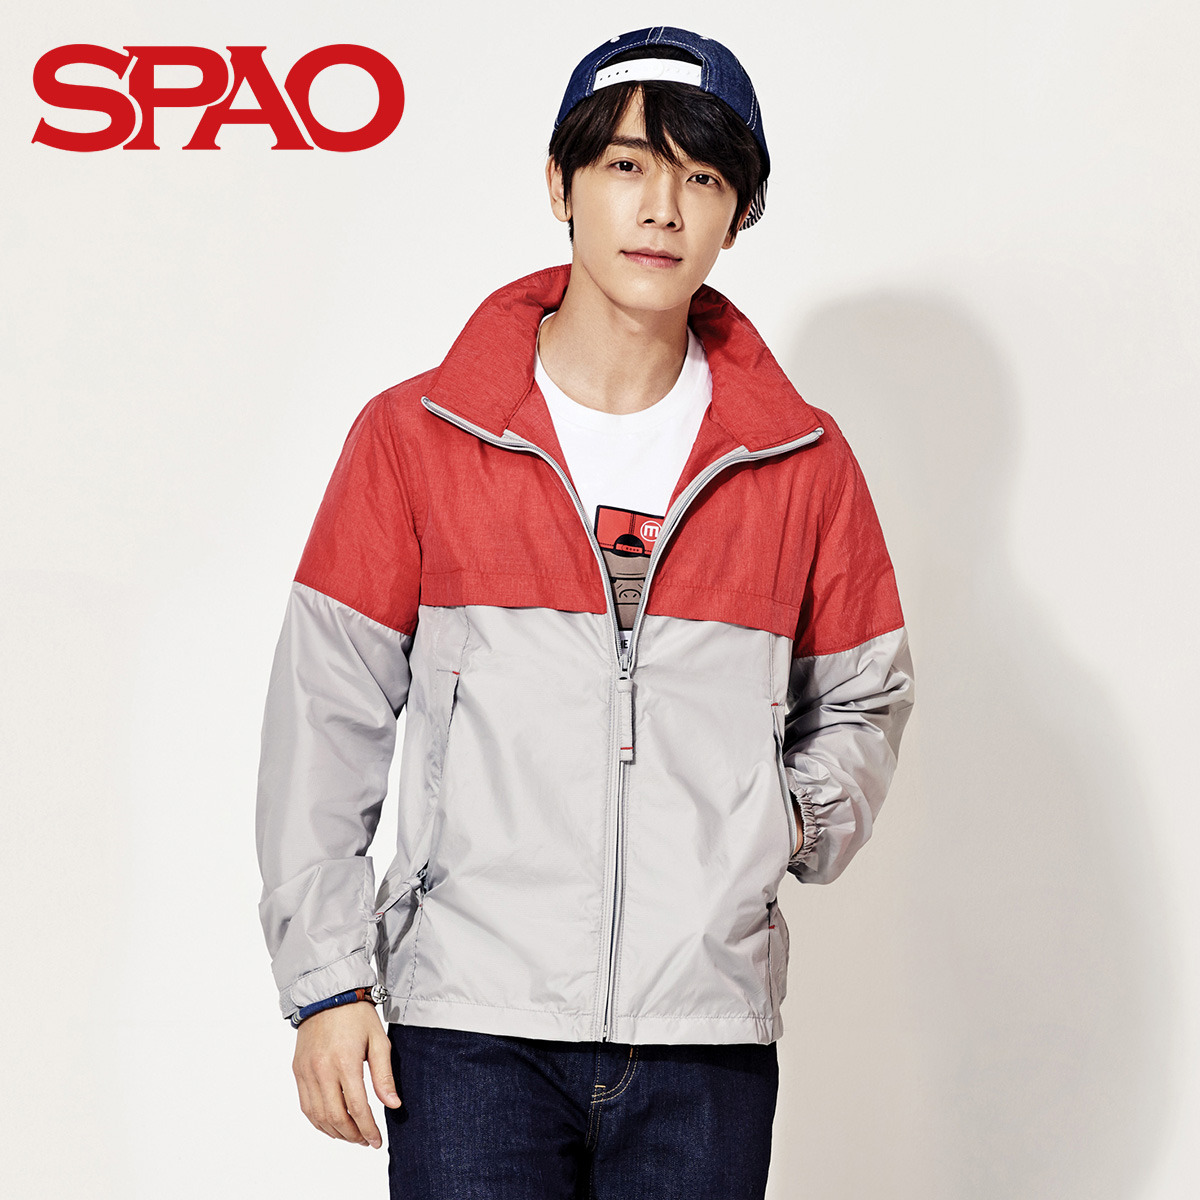 Donghae for SPAO